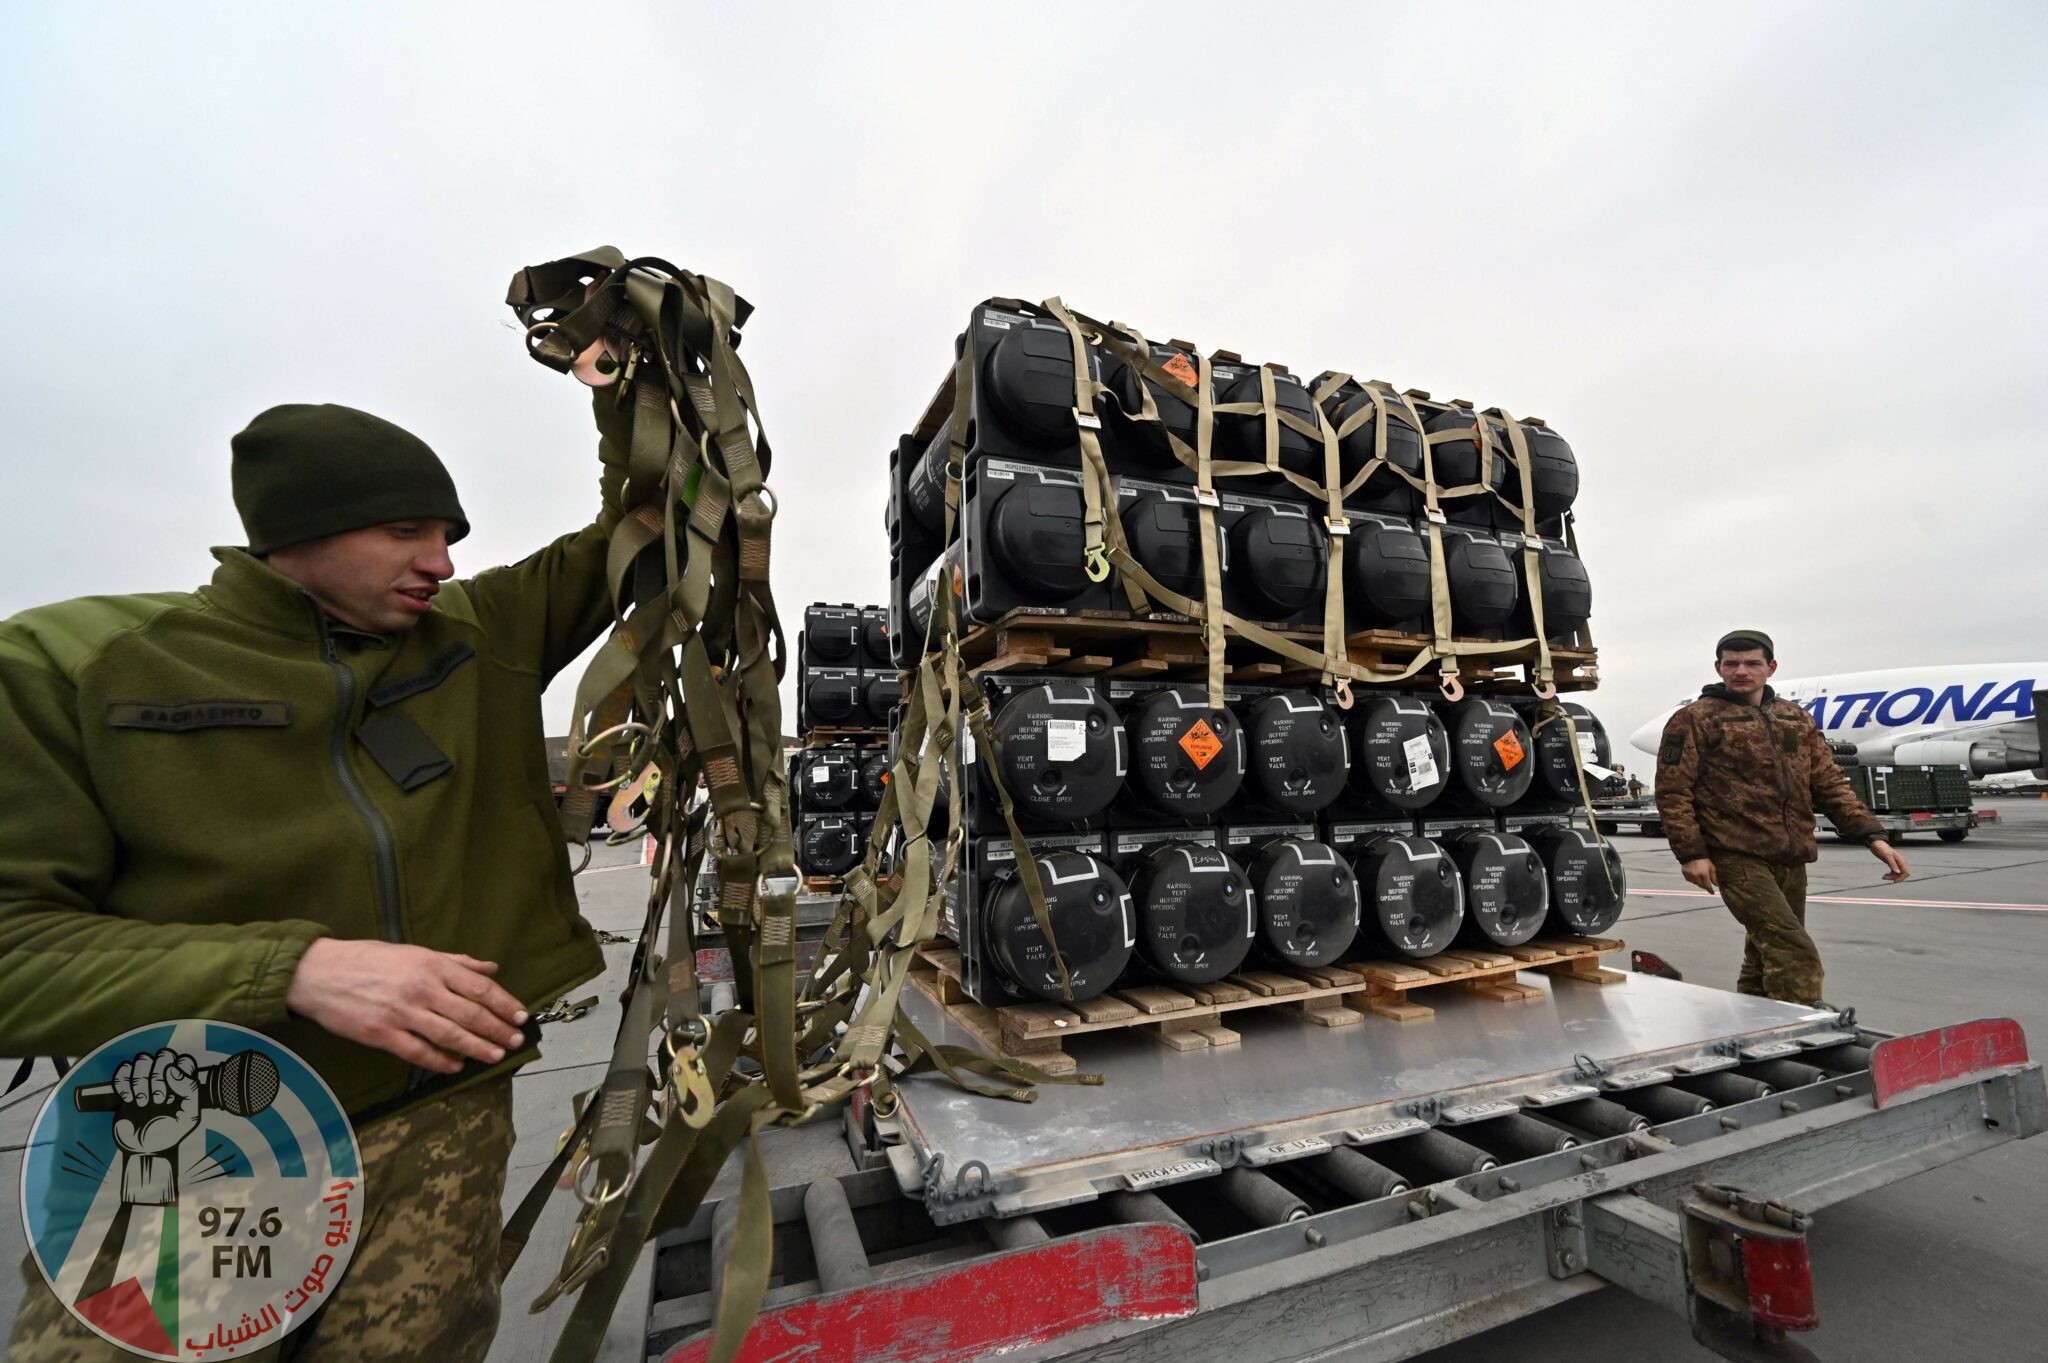 Ukrainian servicemen unload a Boeing 747-412 plane with the FGM-148 Javelin, American man-portable anti-tank missile provided by US to Ukraine as part of a military support, at Kyiv's airport Boryspil on February 11,2022, amid the crisis linked with the threat of Russia's invasion. (Photo by Sergei SUPINSKY / AFP)